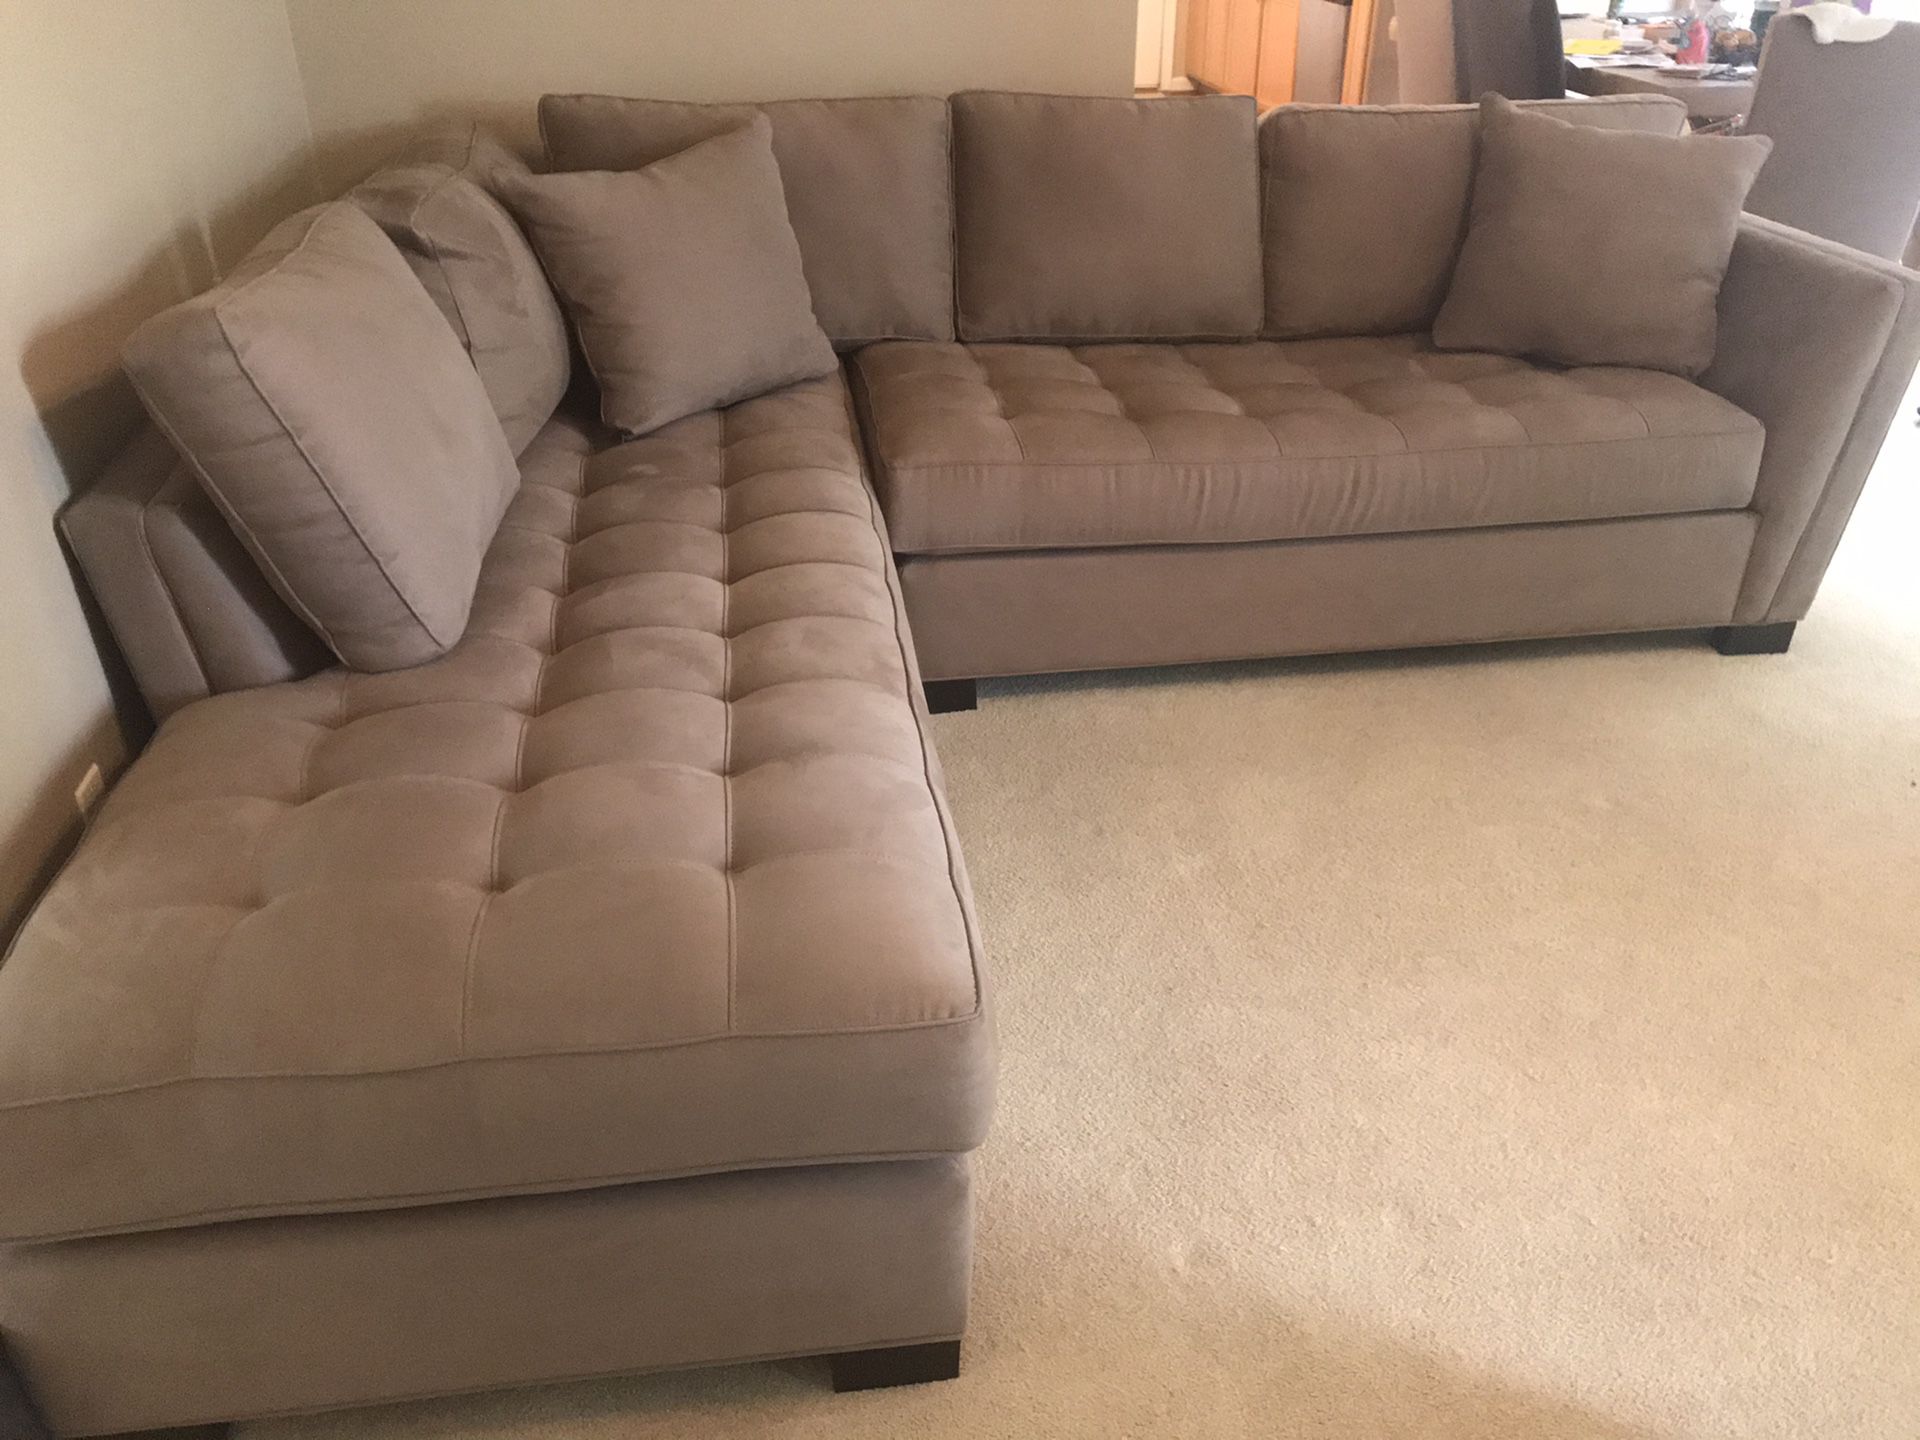 BRAND NEW CINDY CRAWFORD 2 PIECE SECTIONAL